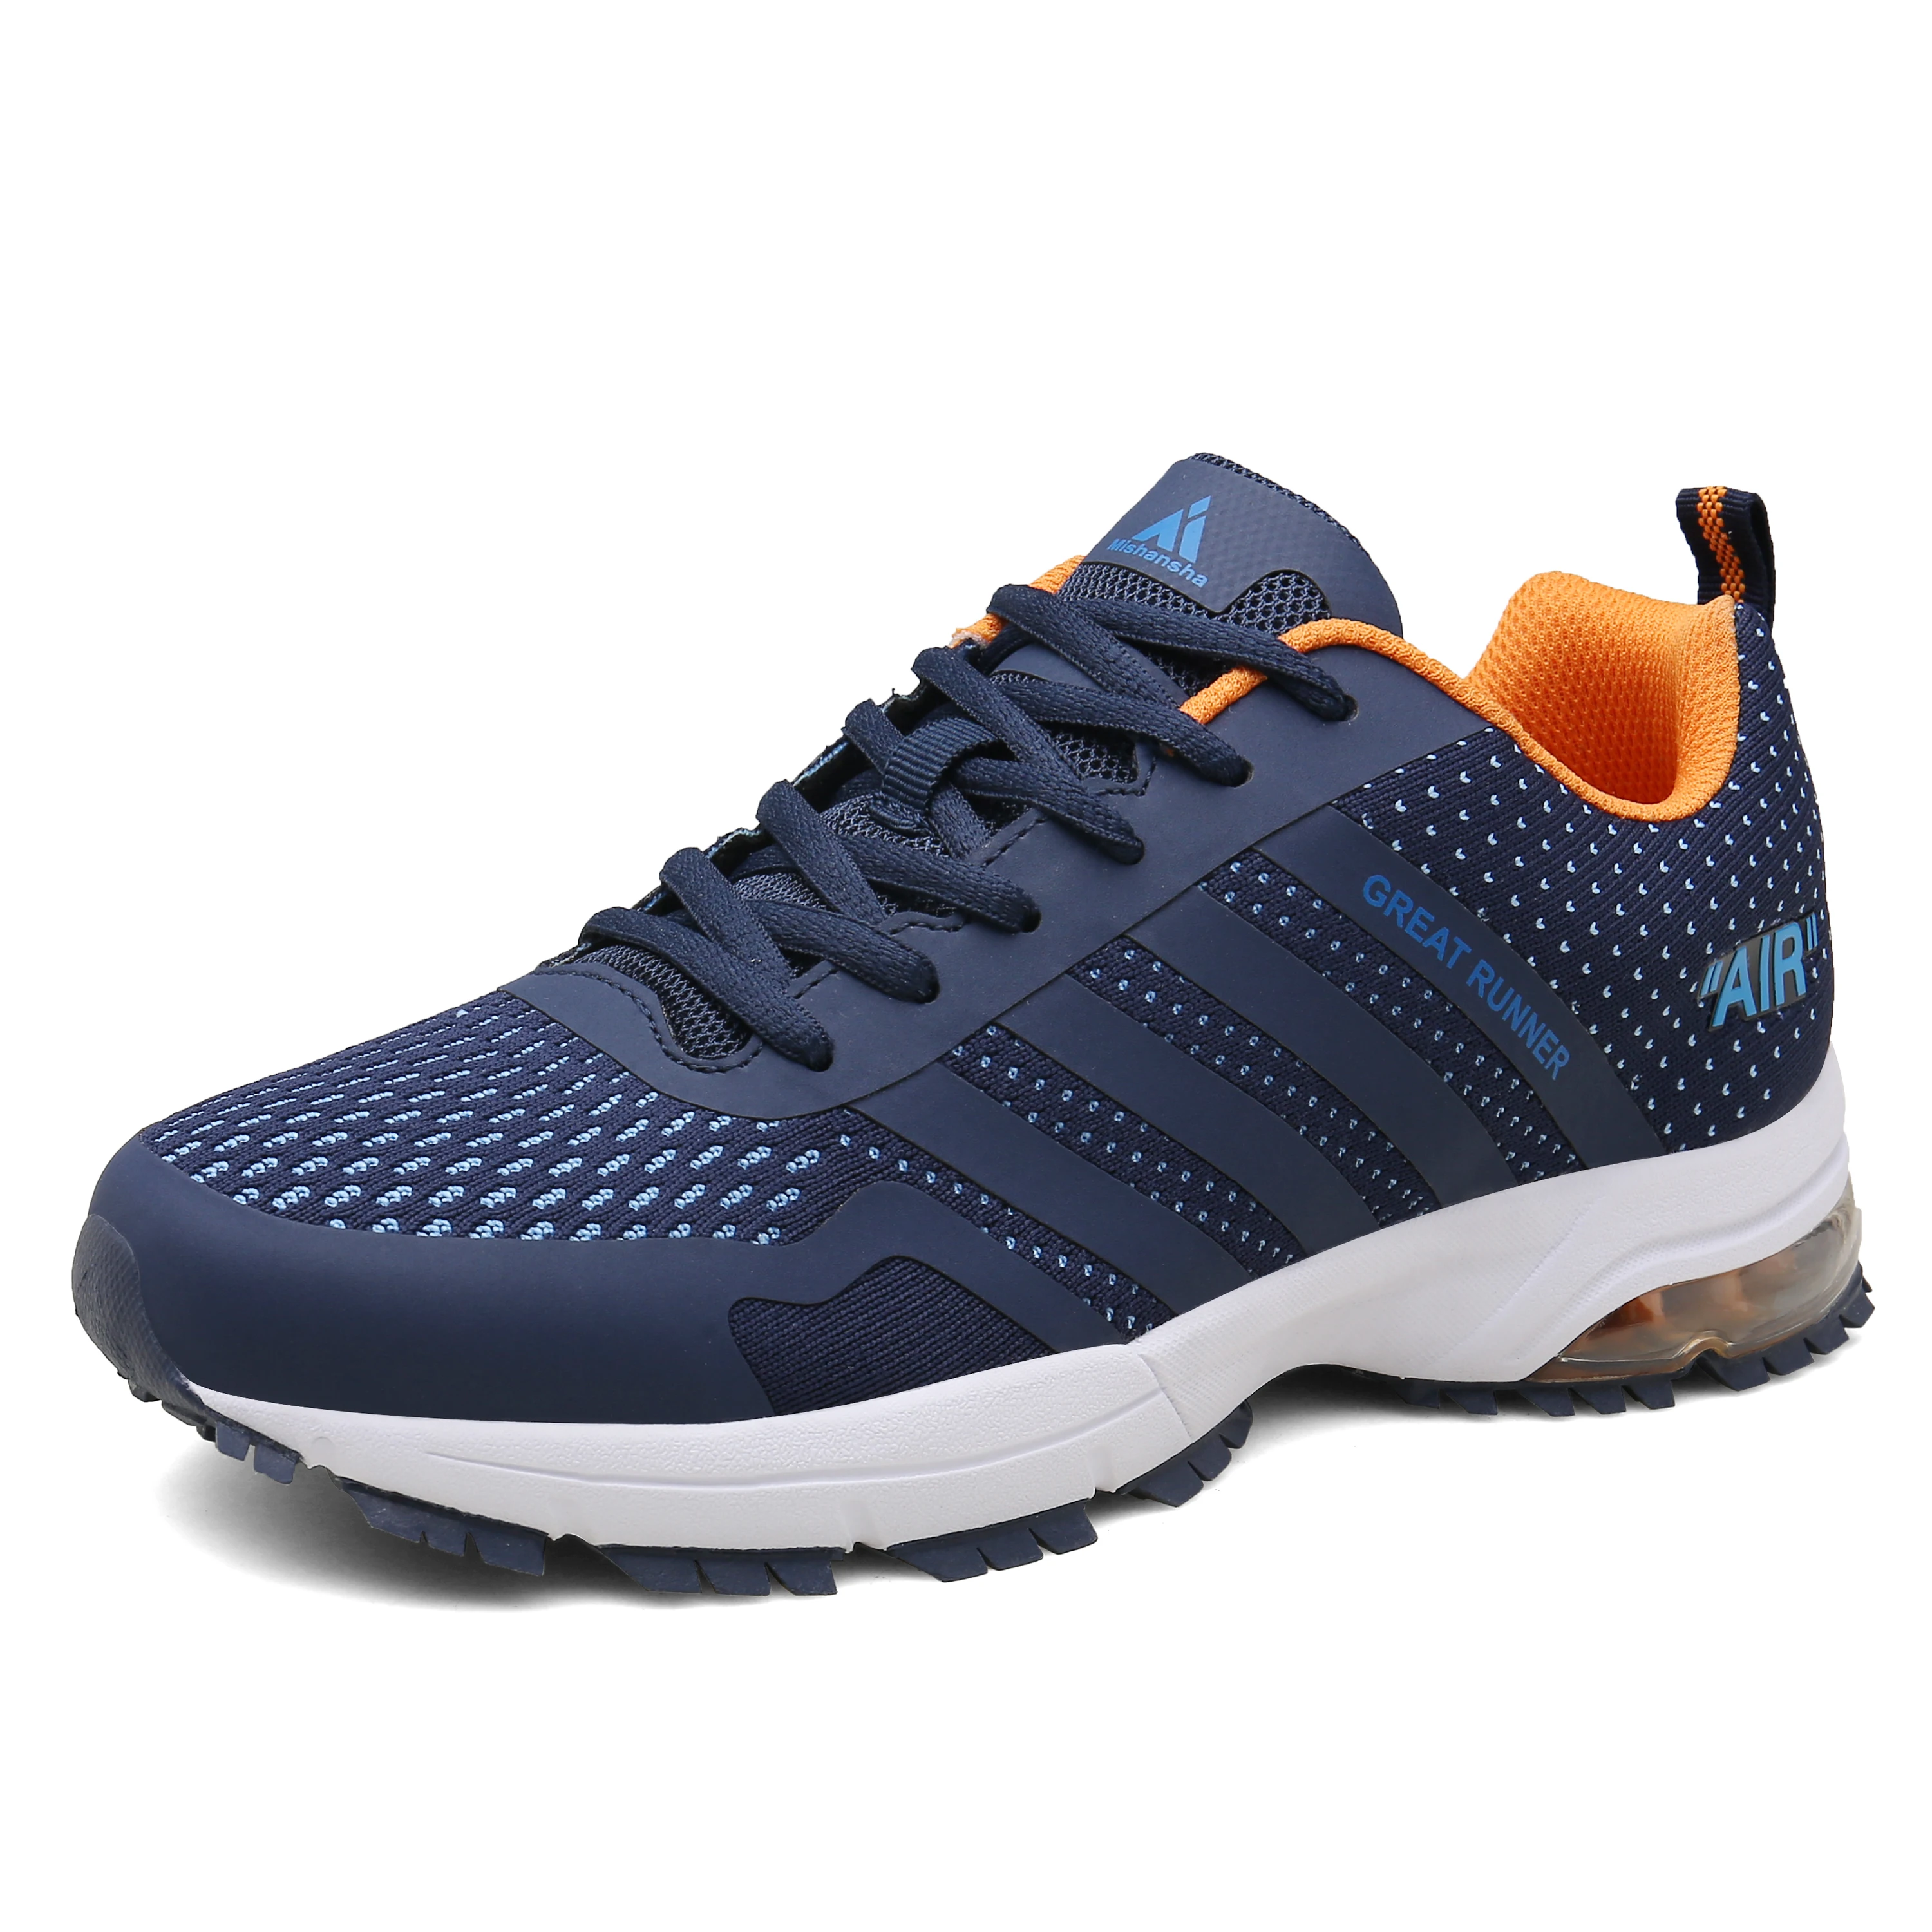 men's casual breathable athletic sports shoes